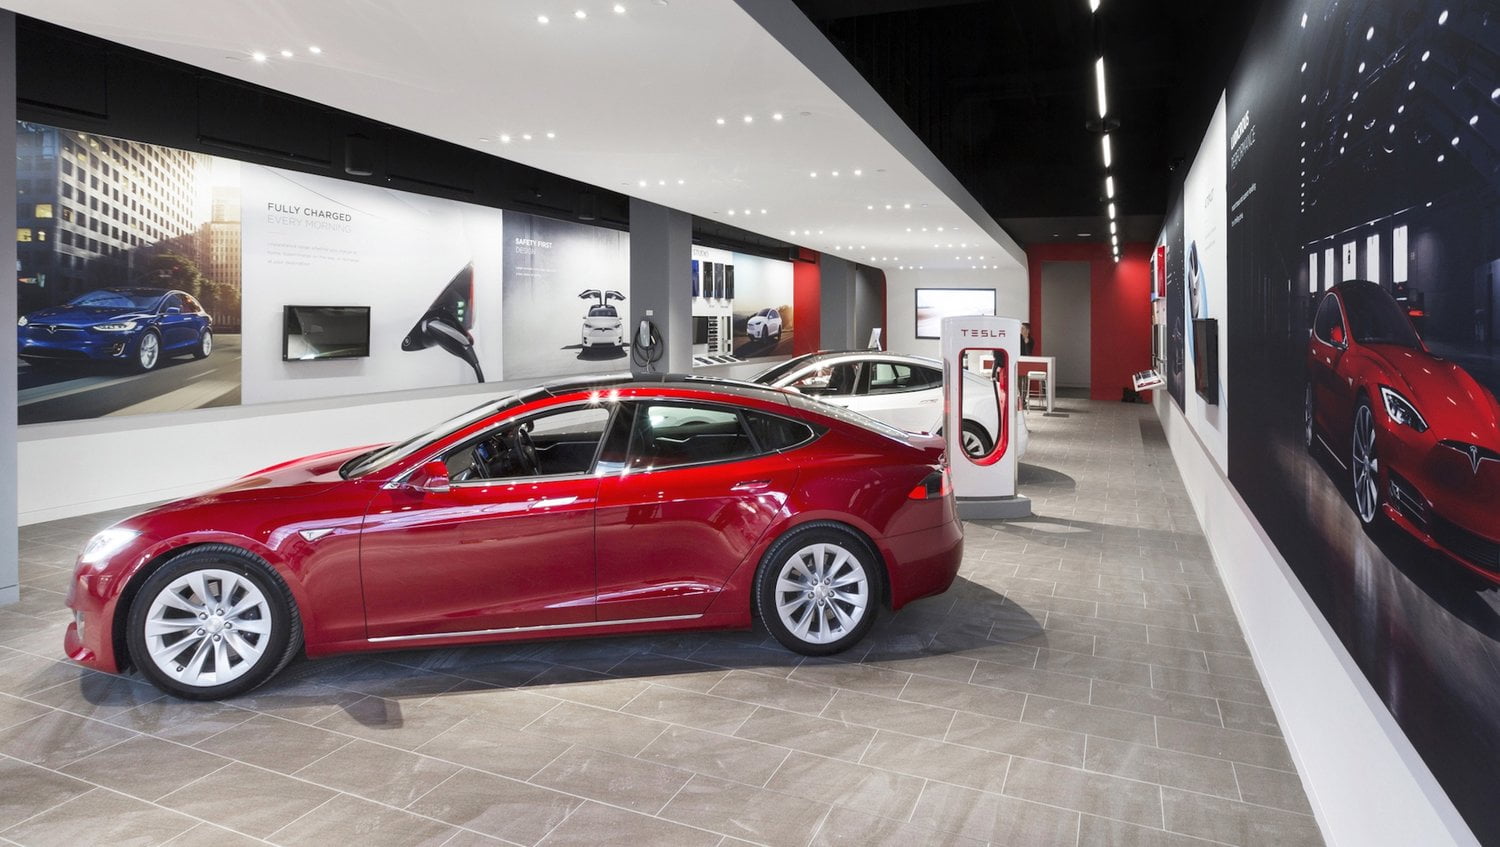 Messenger Healthcare Marketing | Why all ophthalmic practices should be more like Tesla